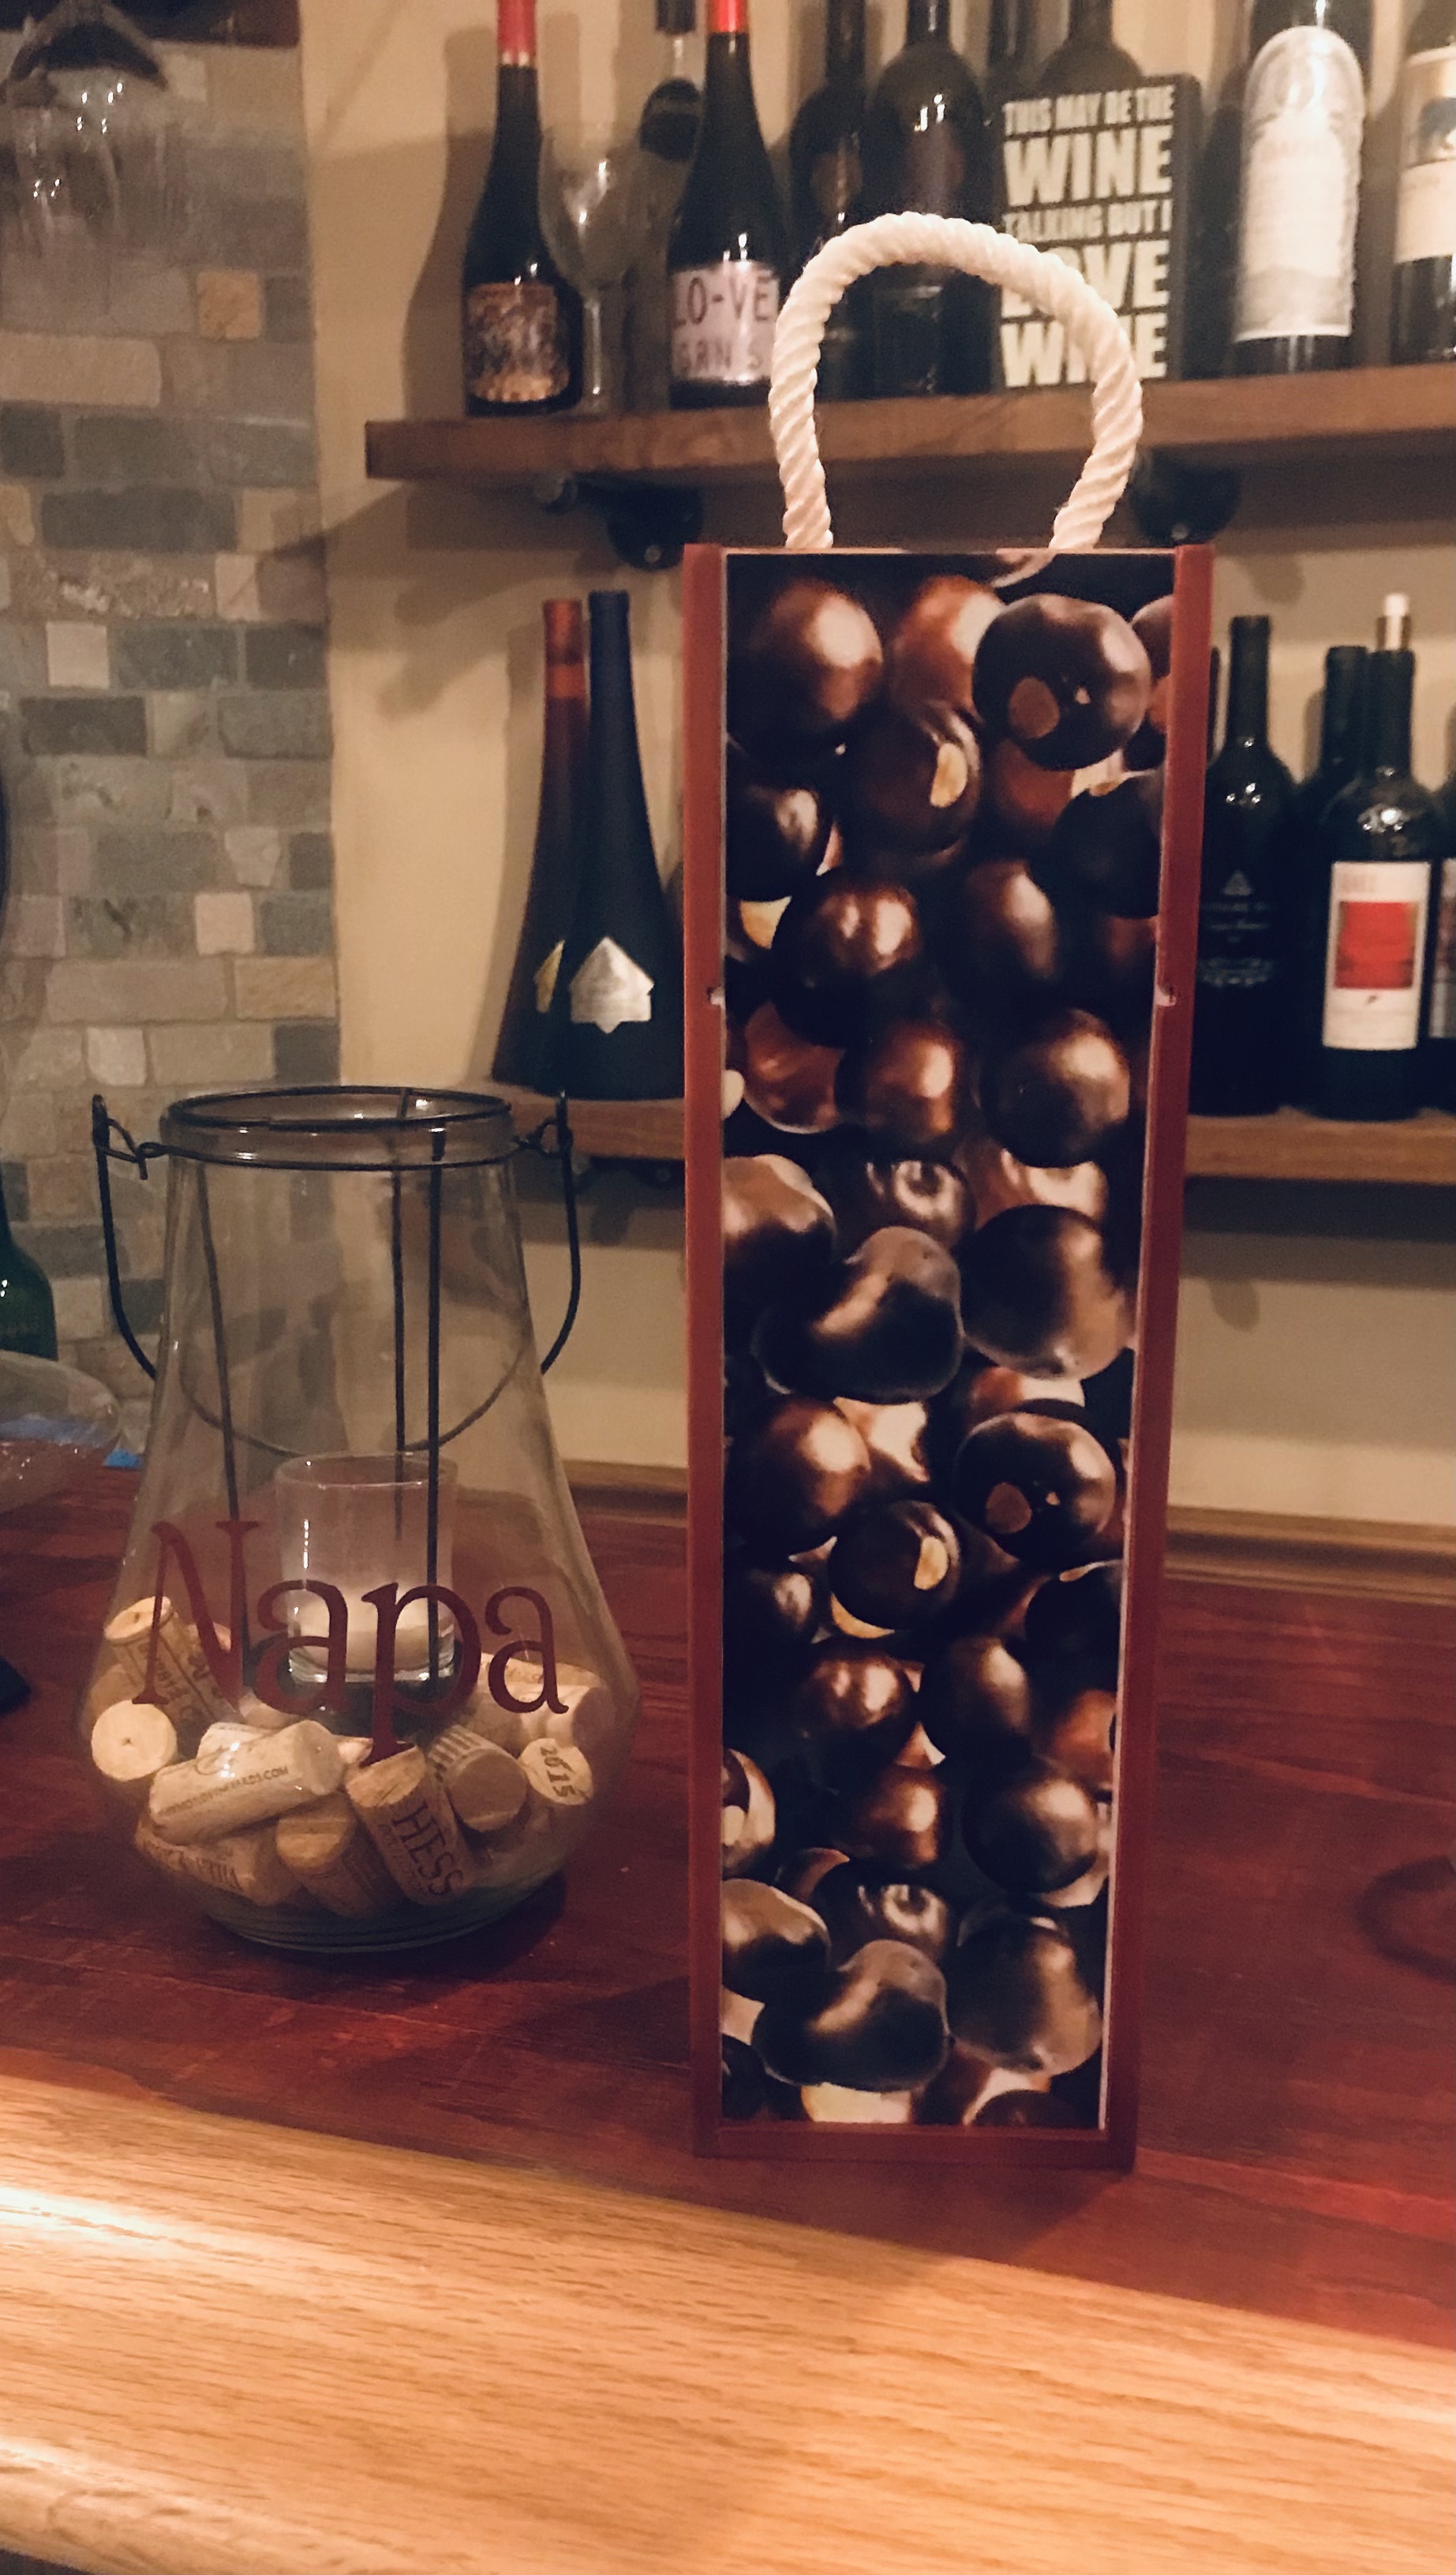 Beautiful buckeye nuts pair well with this wine box made with sublimation printing